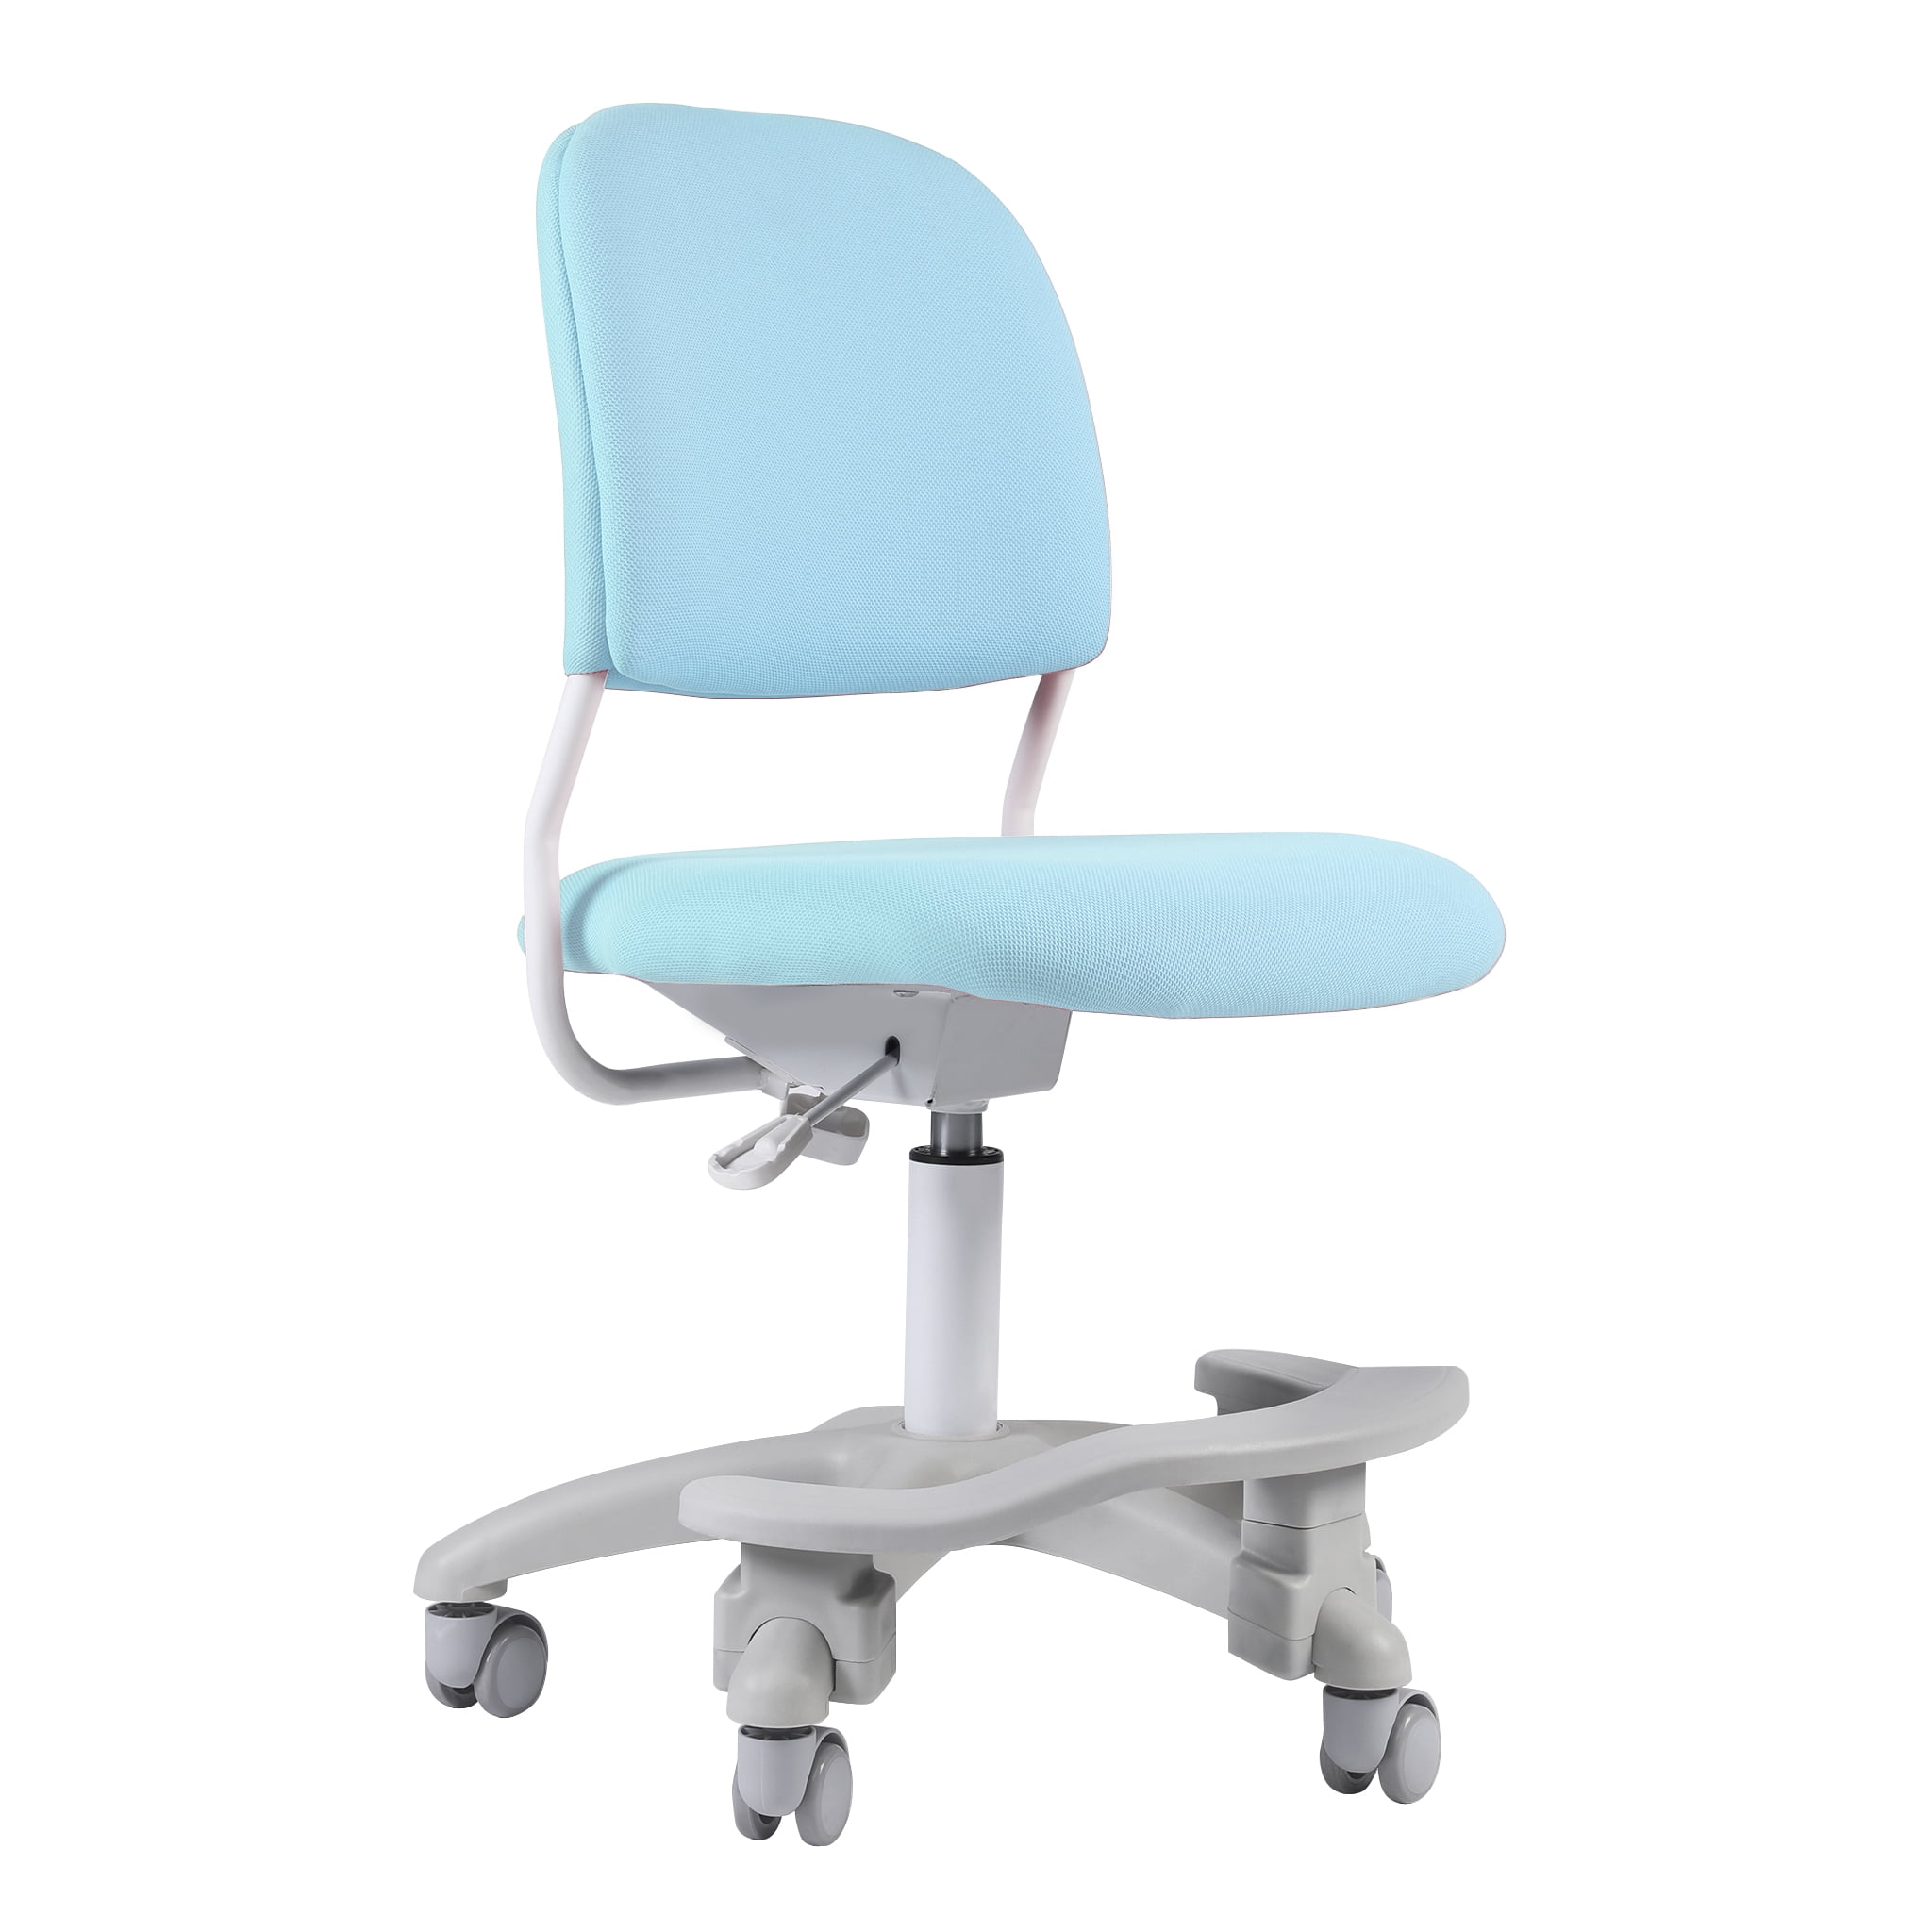 Blue CAR, W//Chair Slipcovers Detachable Footrest Childs Children Student Study Office Computer Chair Adjustable Height and Seat Depth Ergonomic Kids Desk Chair Lumbar Support W//Slipcovers